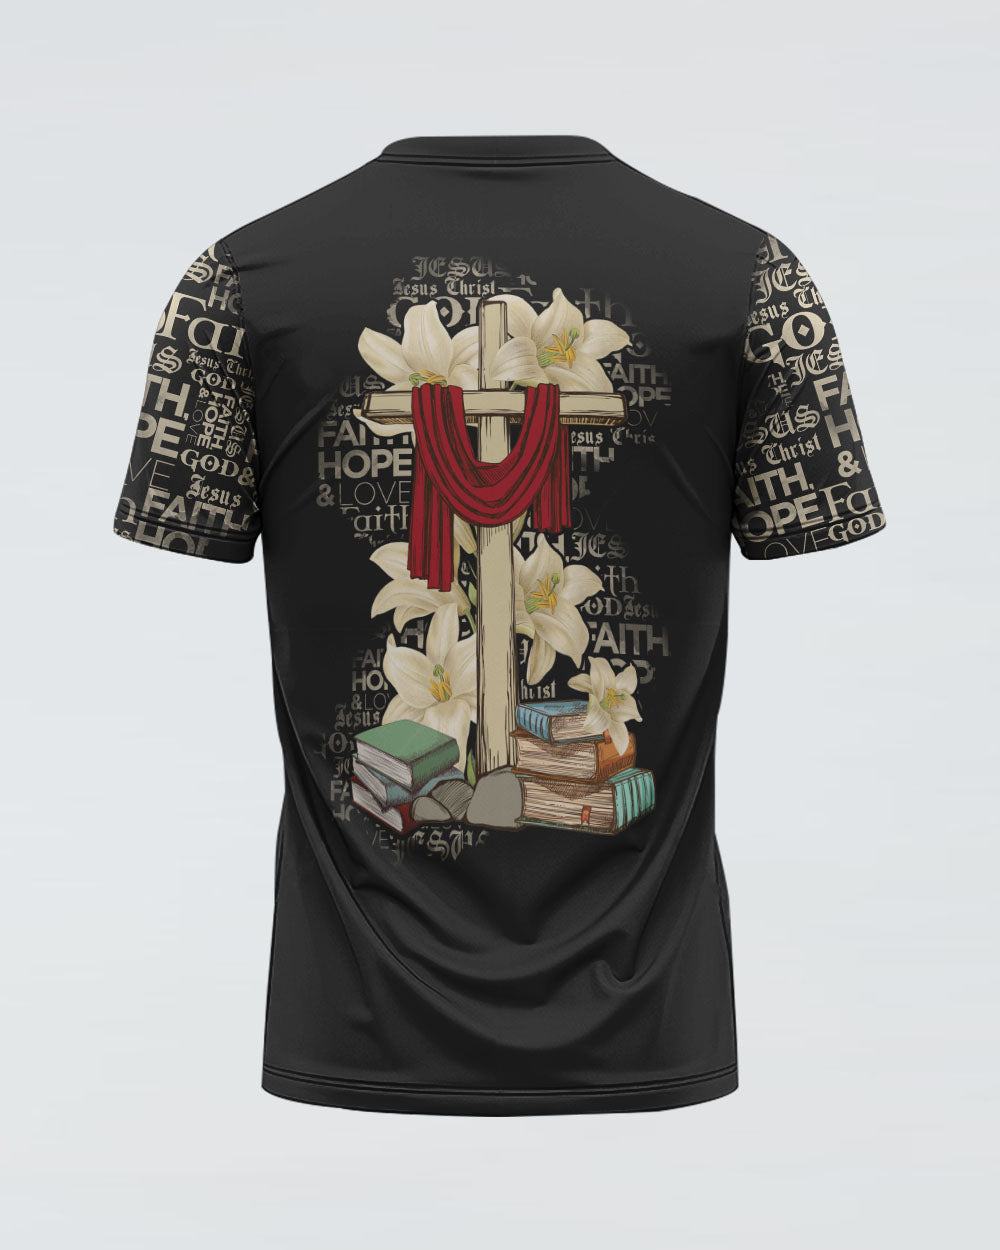 Lily Flower And Cross Book Women's Christian Tshirt